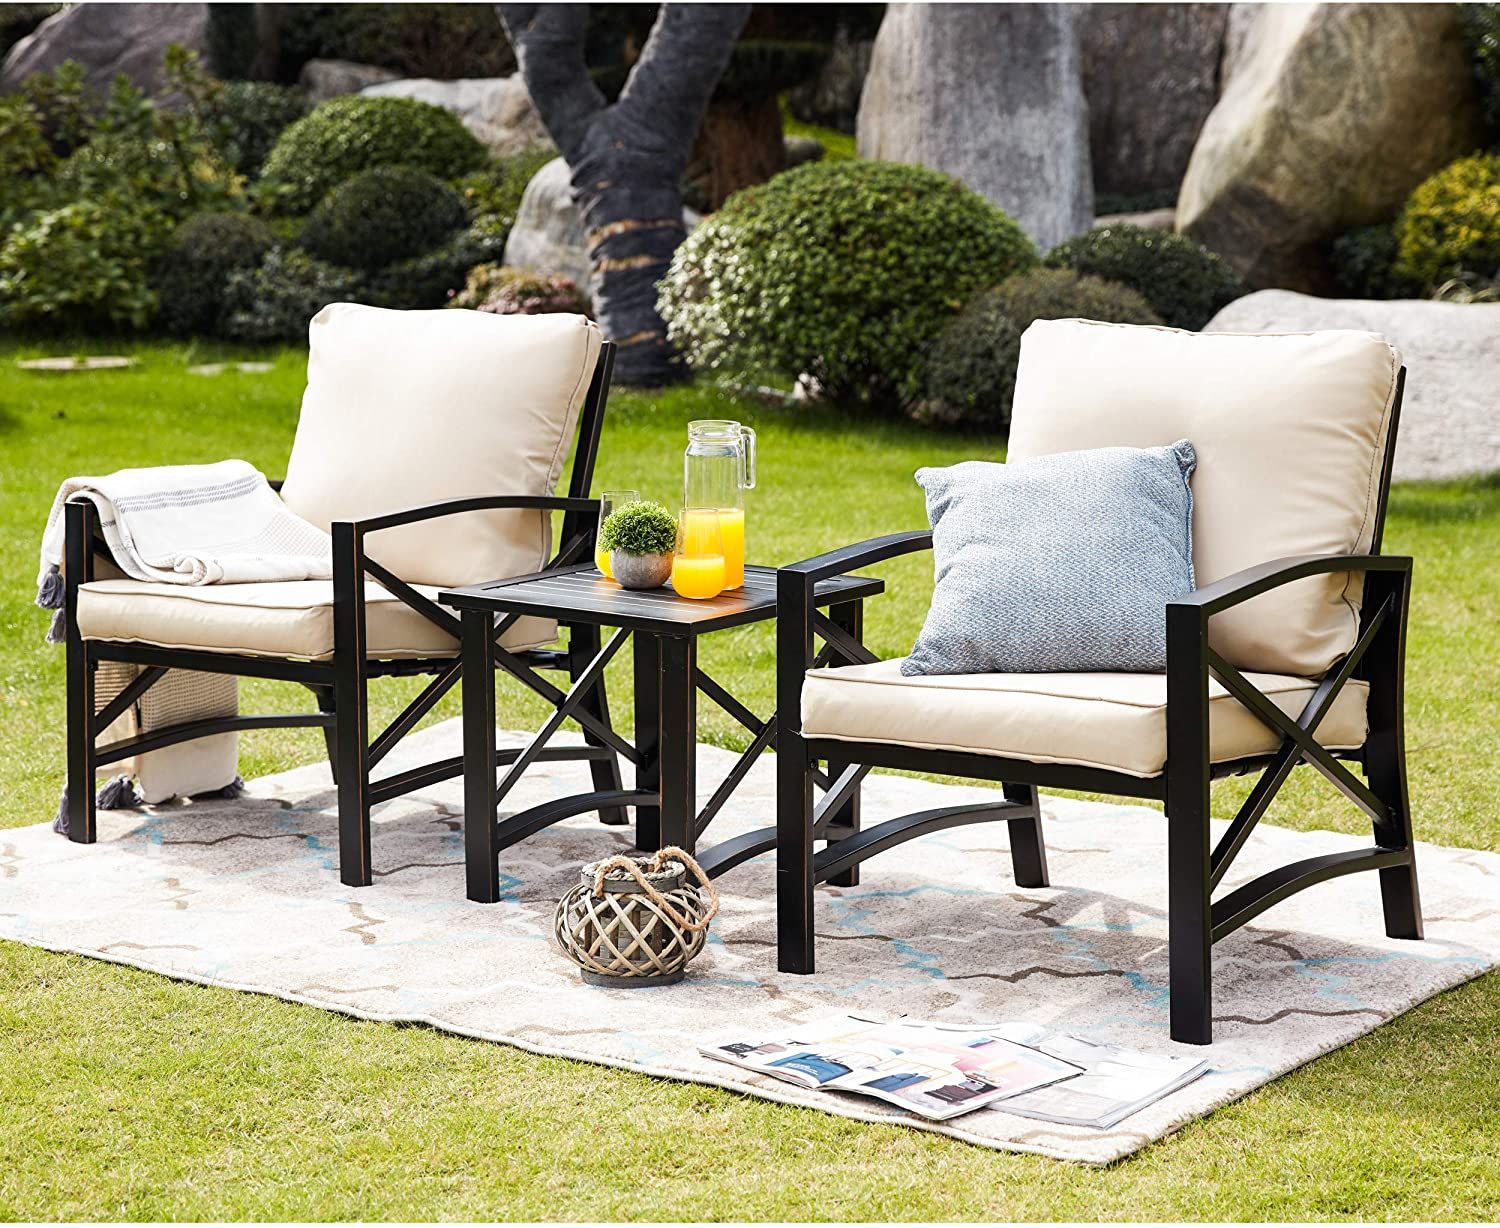 8 Best Patio Furniture Sets 2022 | The Strategist